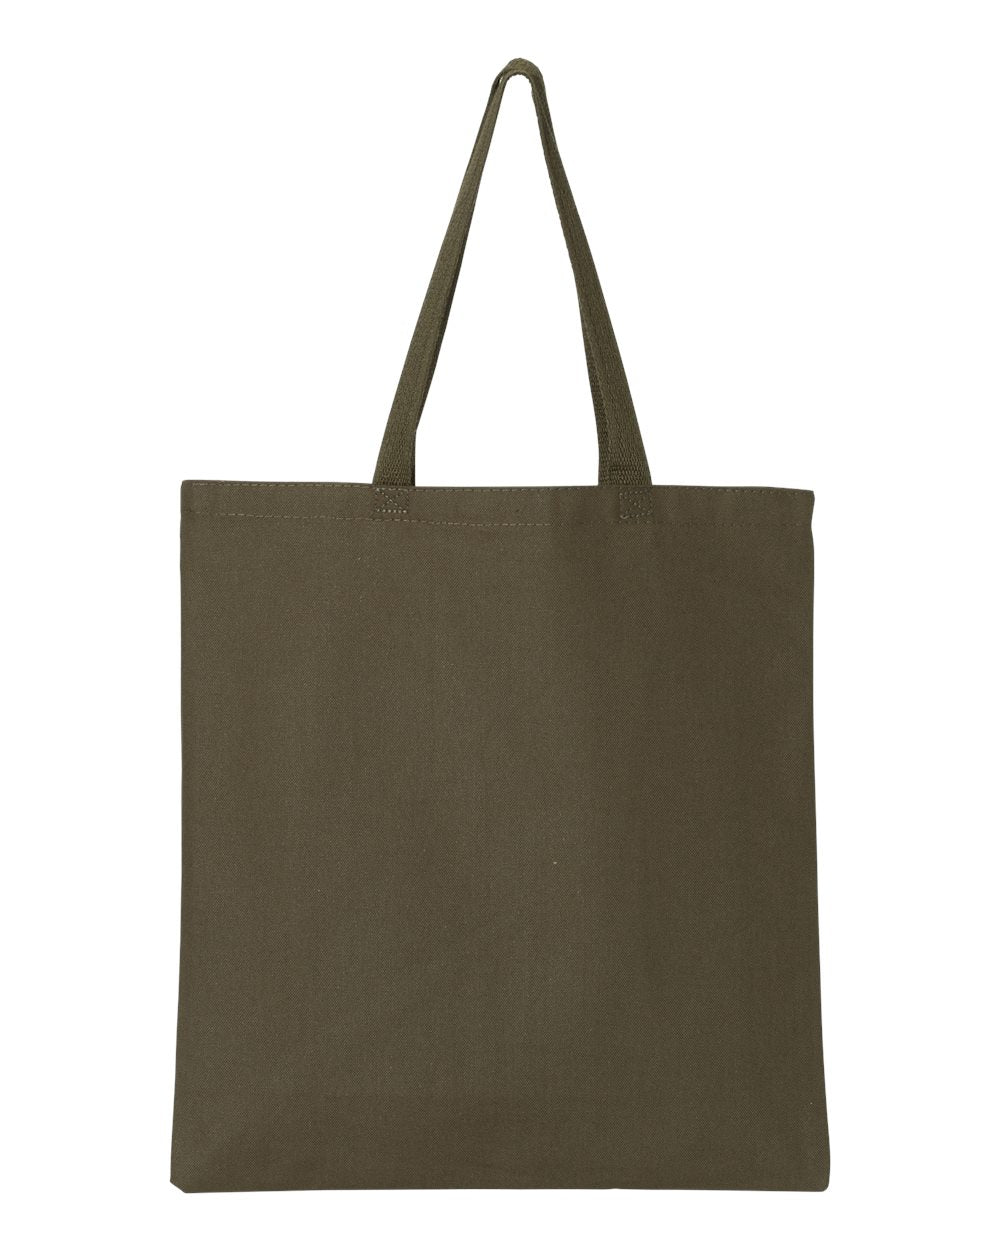 Q-Tees - Promotional Tote - Q800